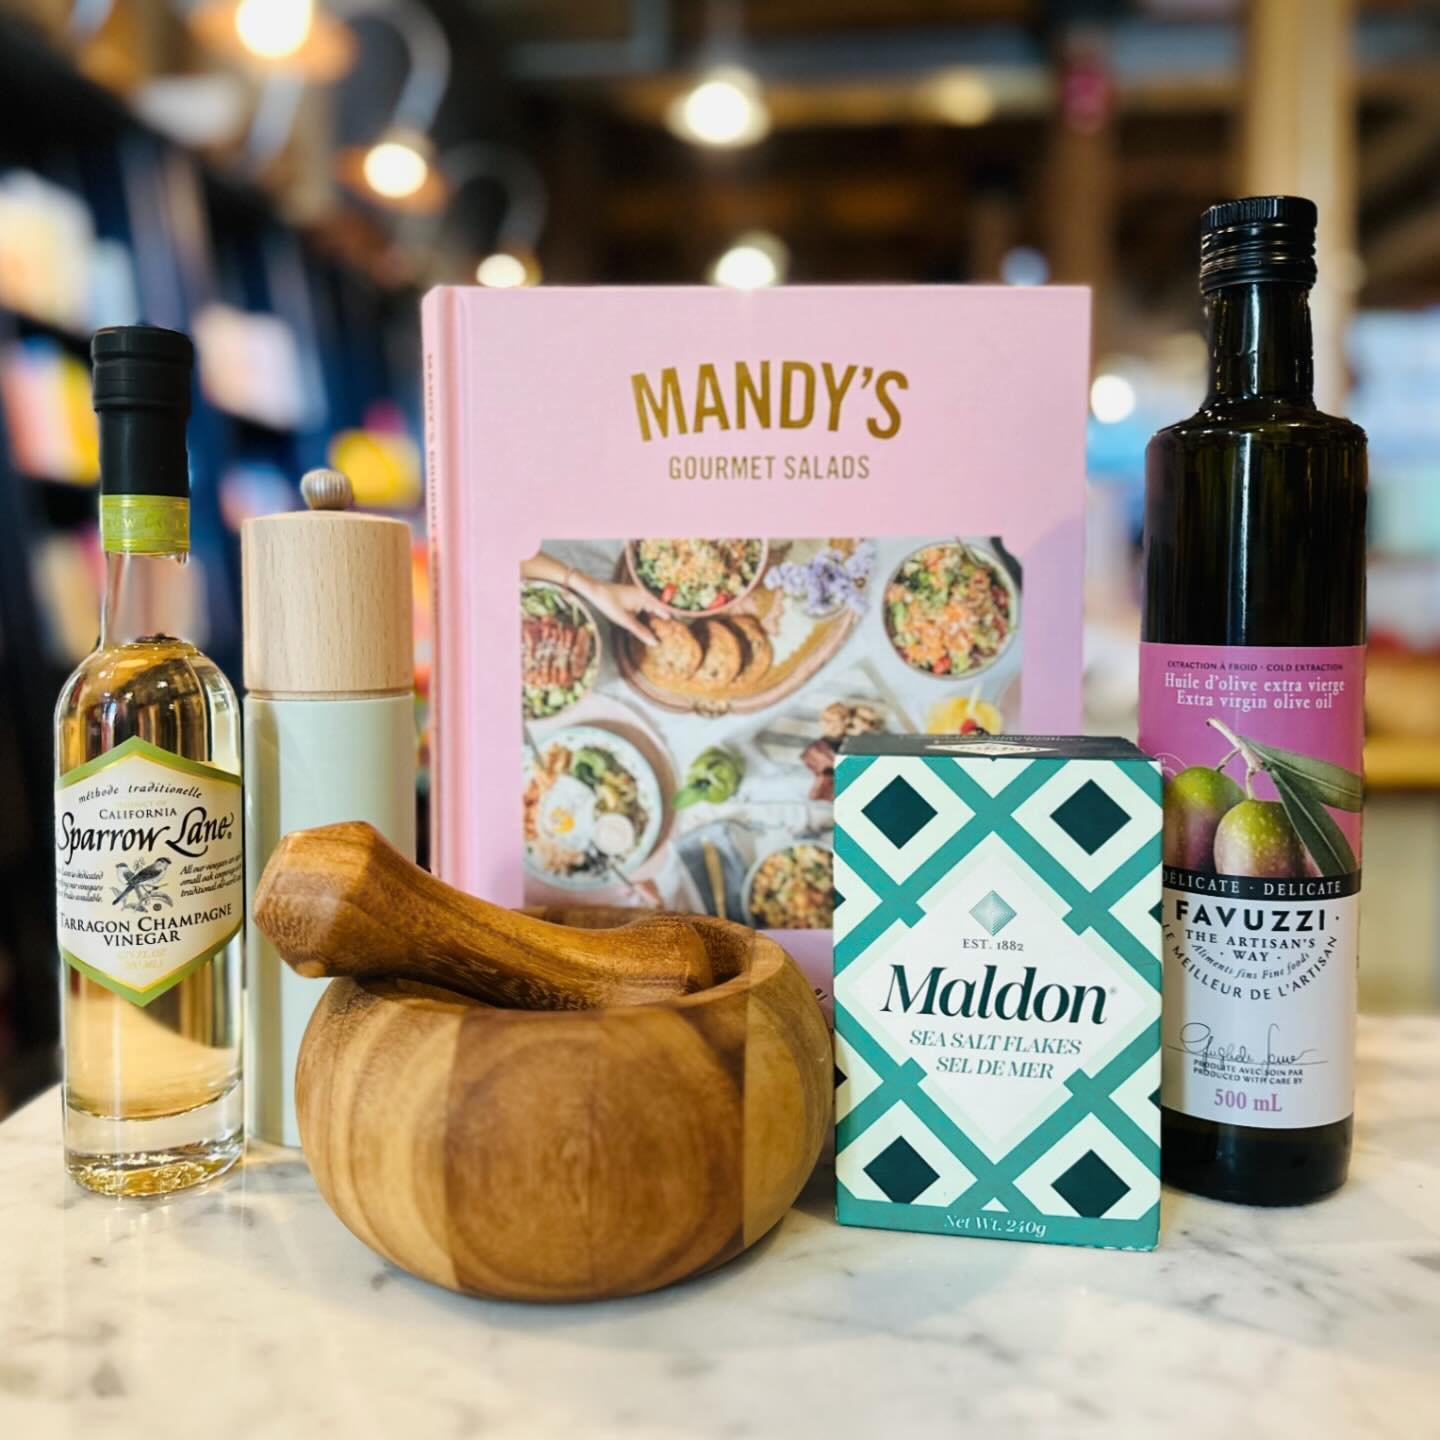 ✨Mom ✨Maman ✨Umma ✨Madre ✨Mother✨

Whether she&rsquo;s a fabulous baker, a bon vivant, or a barbecue queen, we have the perfect gift at the store. Celebrate the Mom in your life and make Mother&rsquo;s Day delicious!

#yum #allthingsculinary #yyc #yy